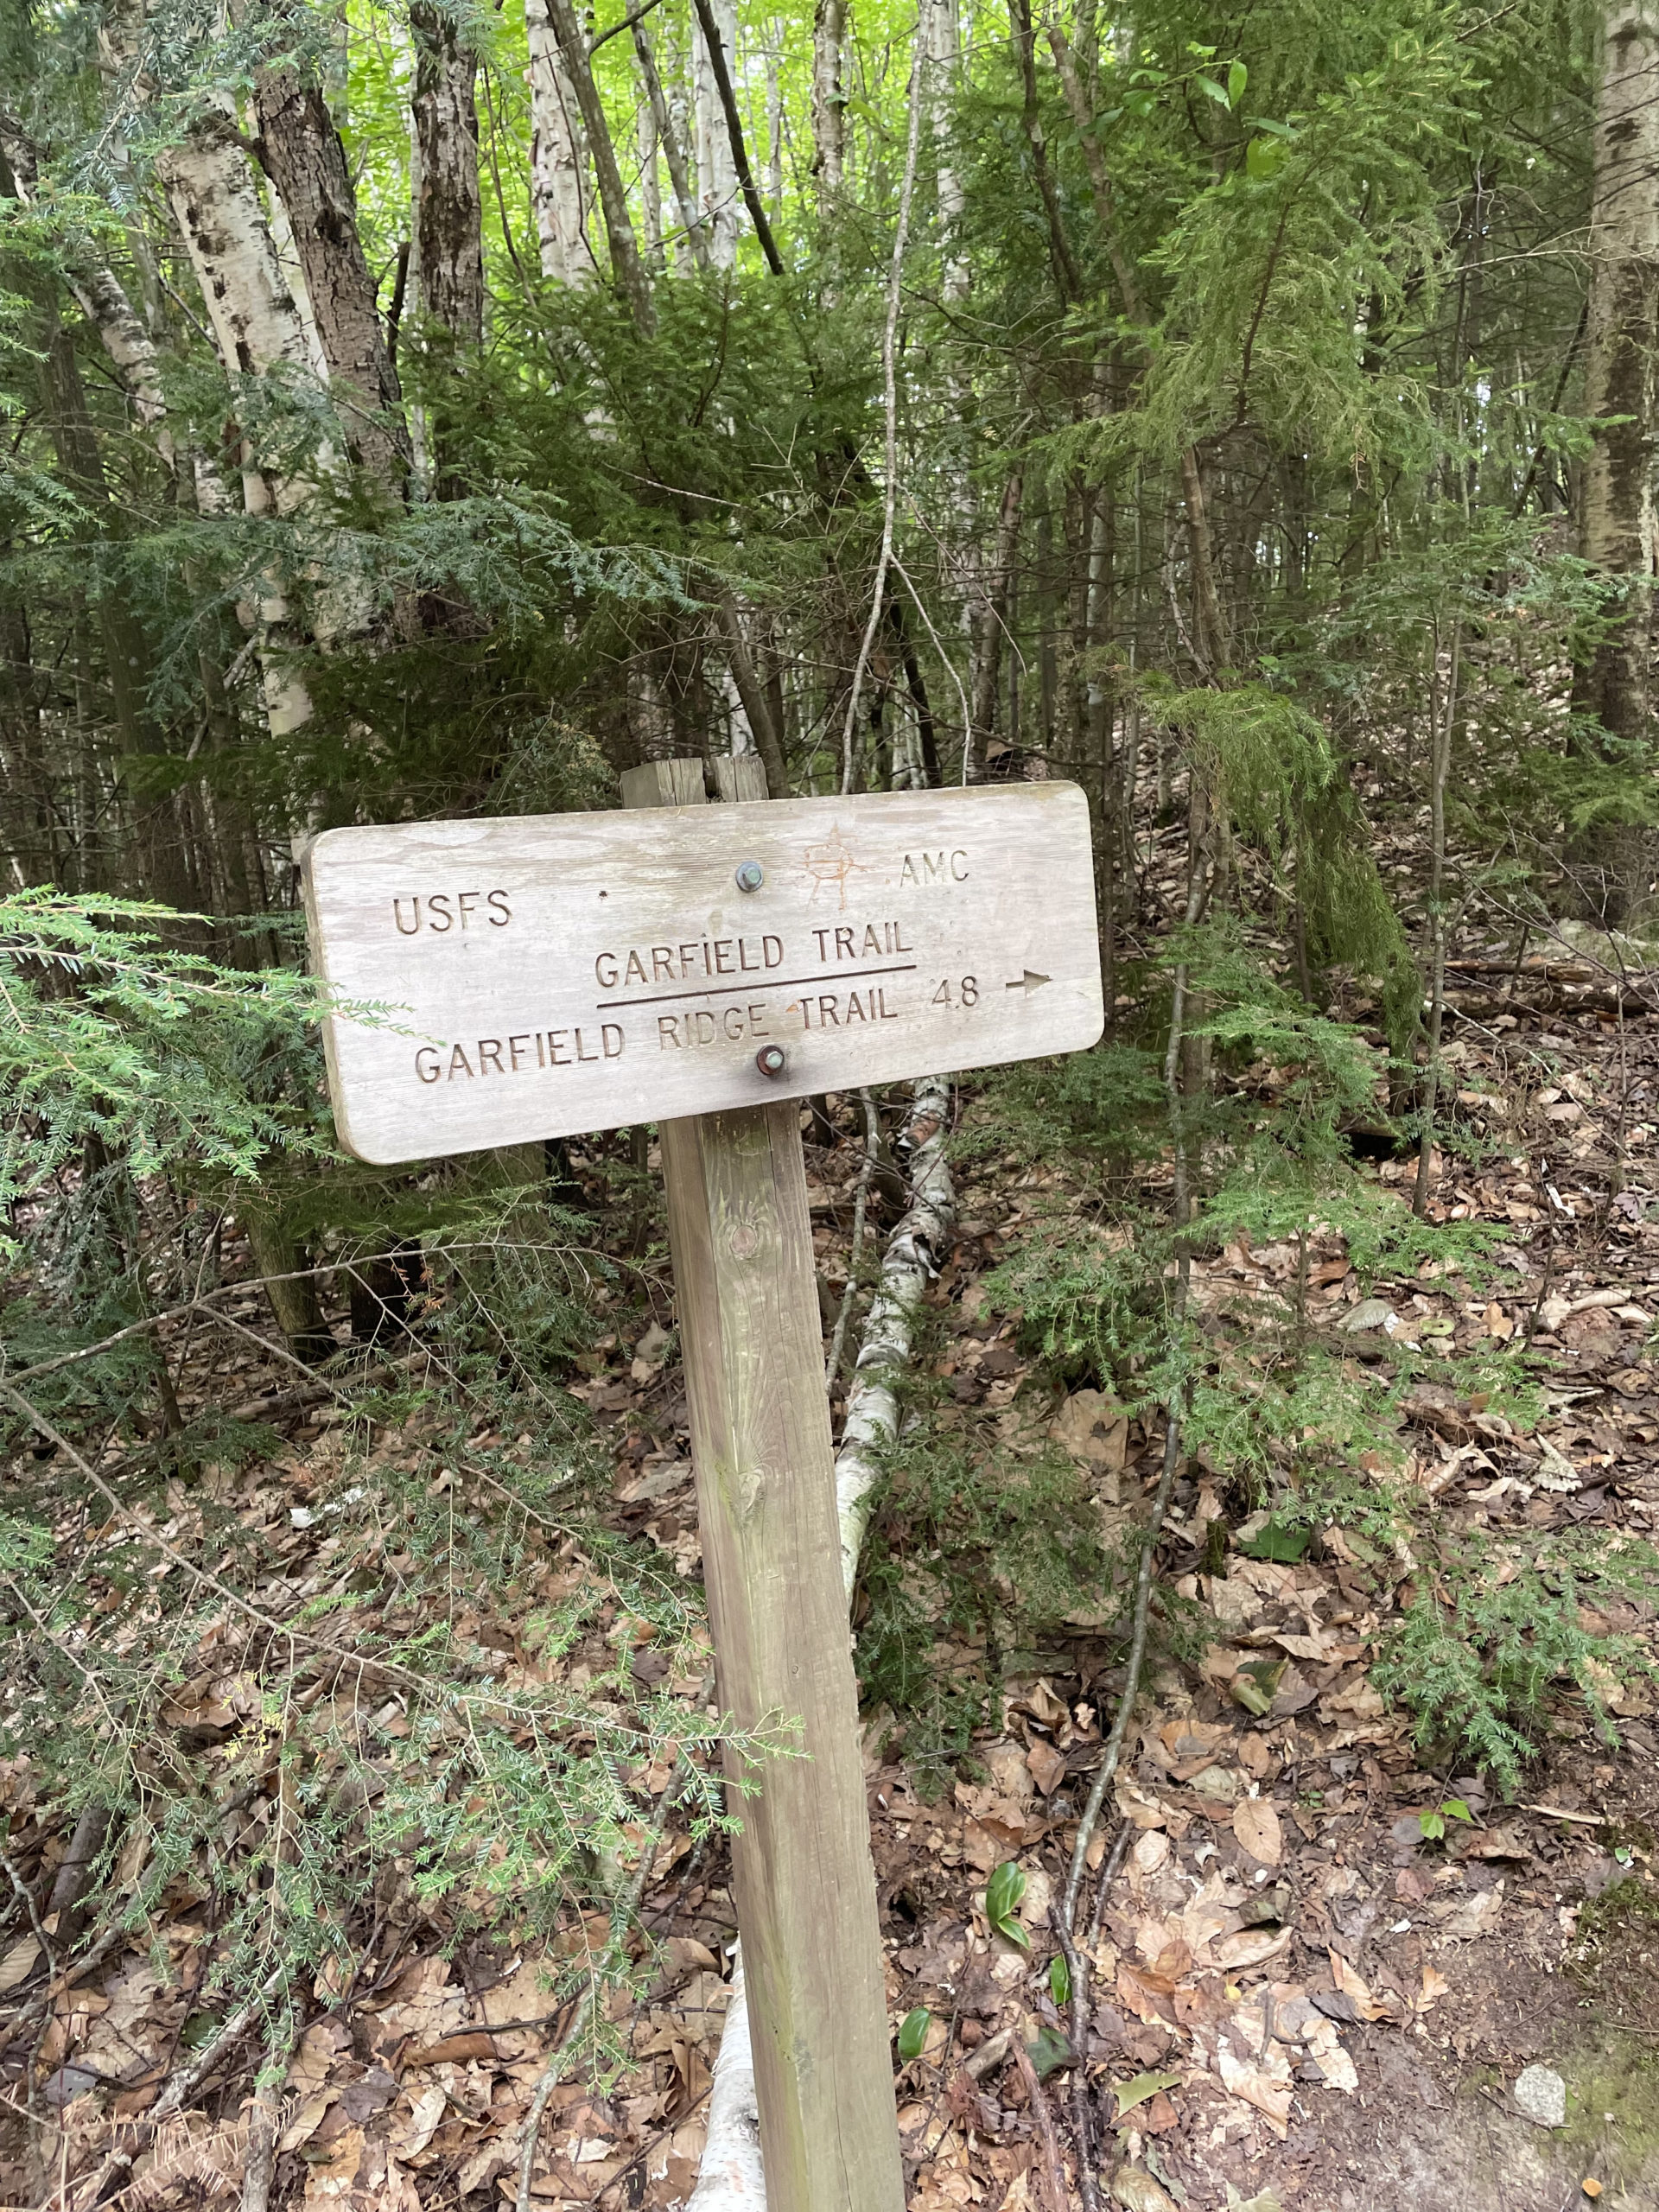 Trail sign, seen while hiking Mt. Garfield in the White Mountain National Forest, NH